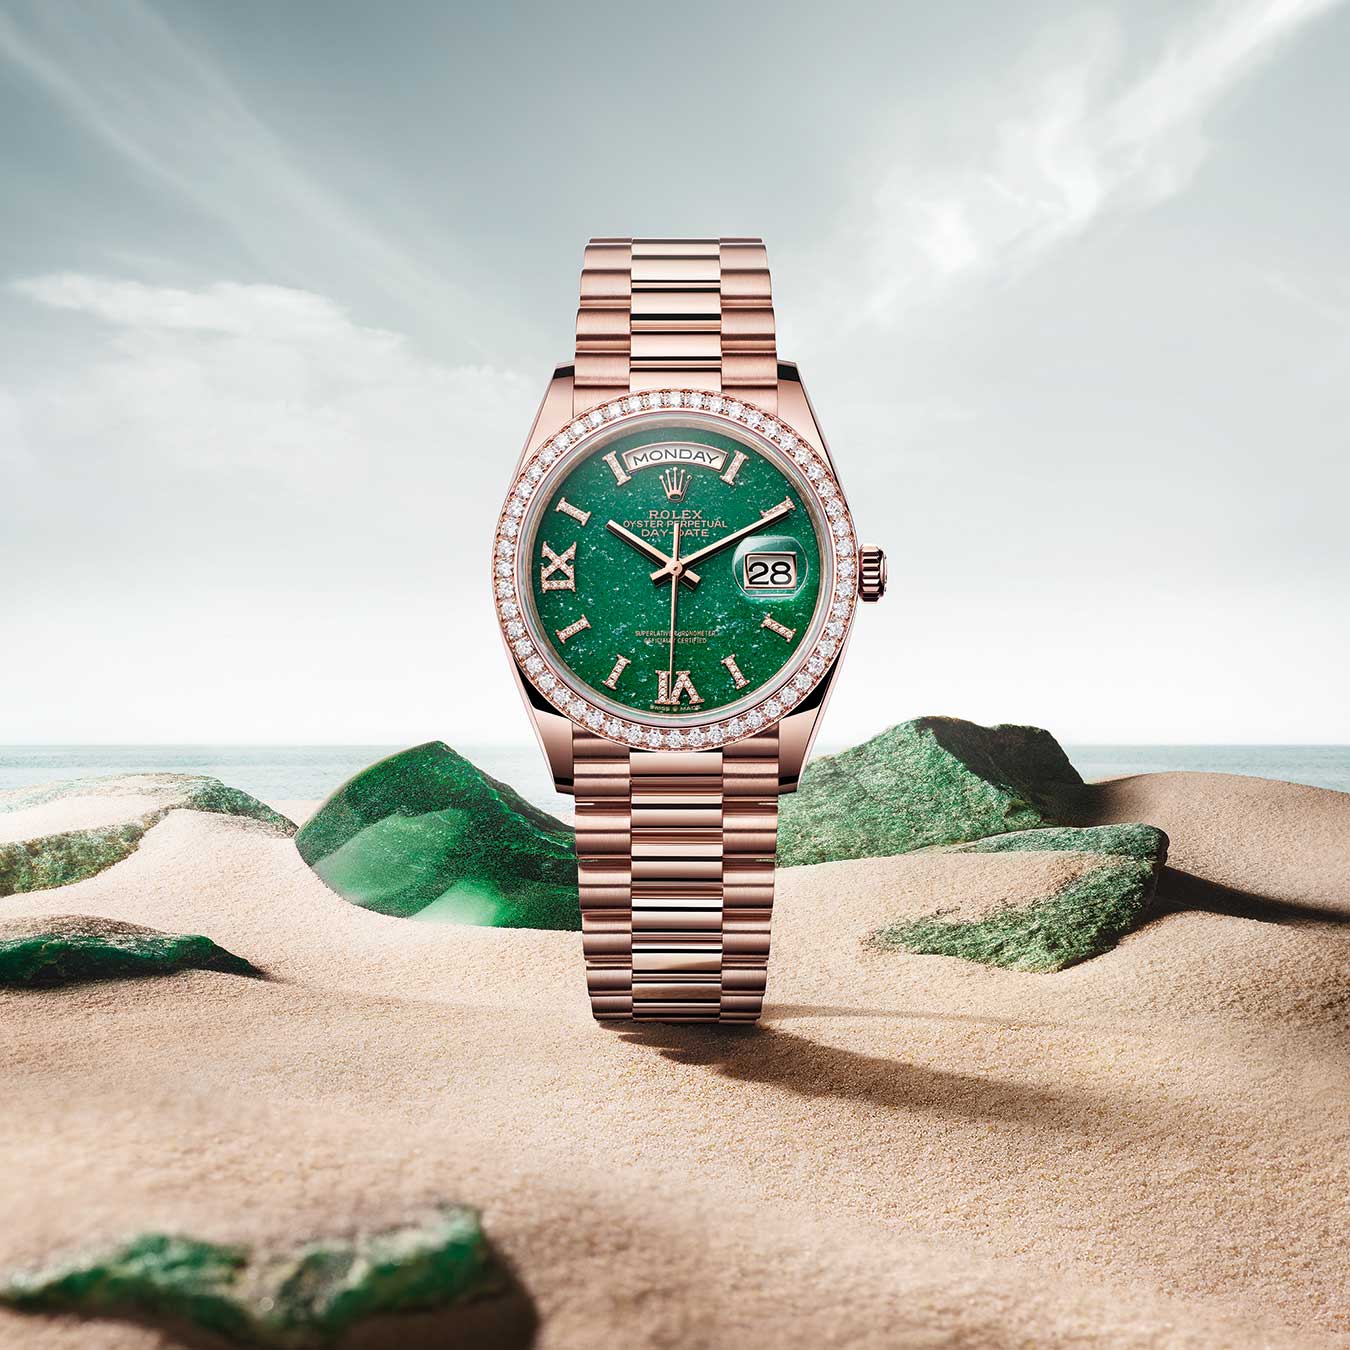 Rolex Day-Date 36 with Green Aventurine Dial on Sand Display